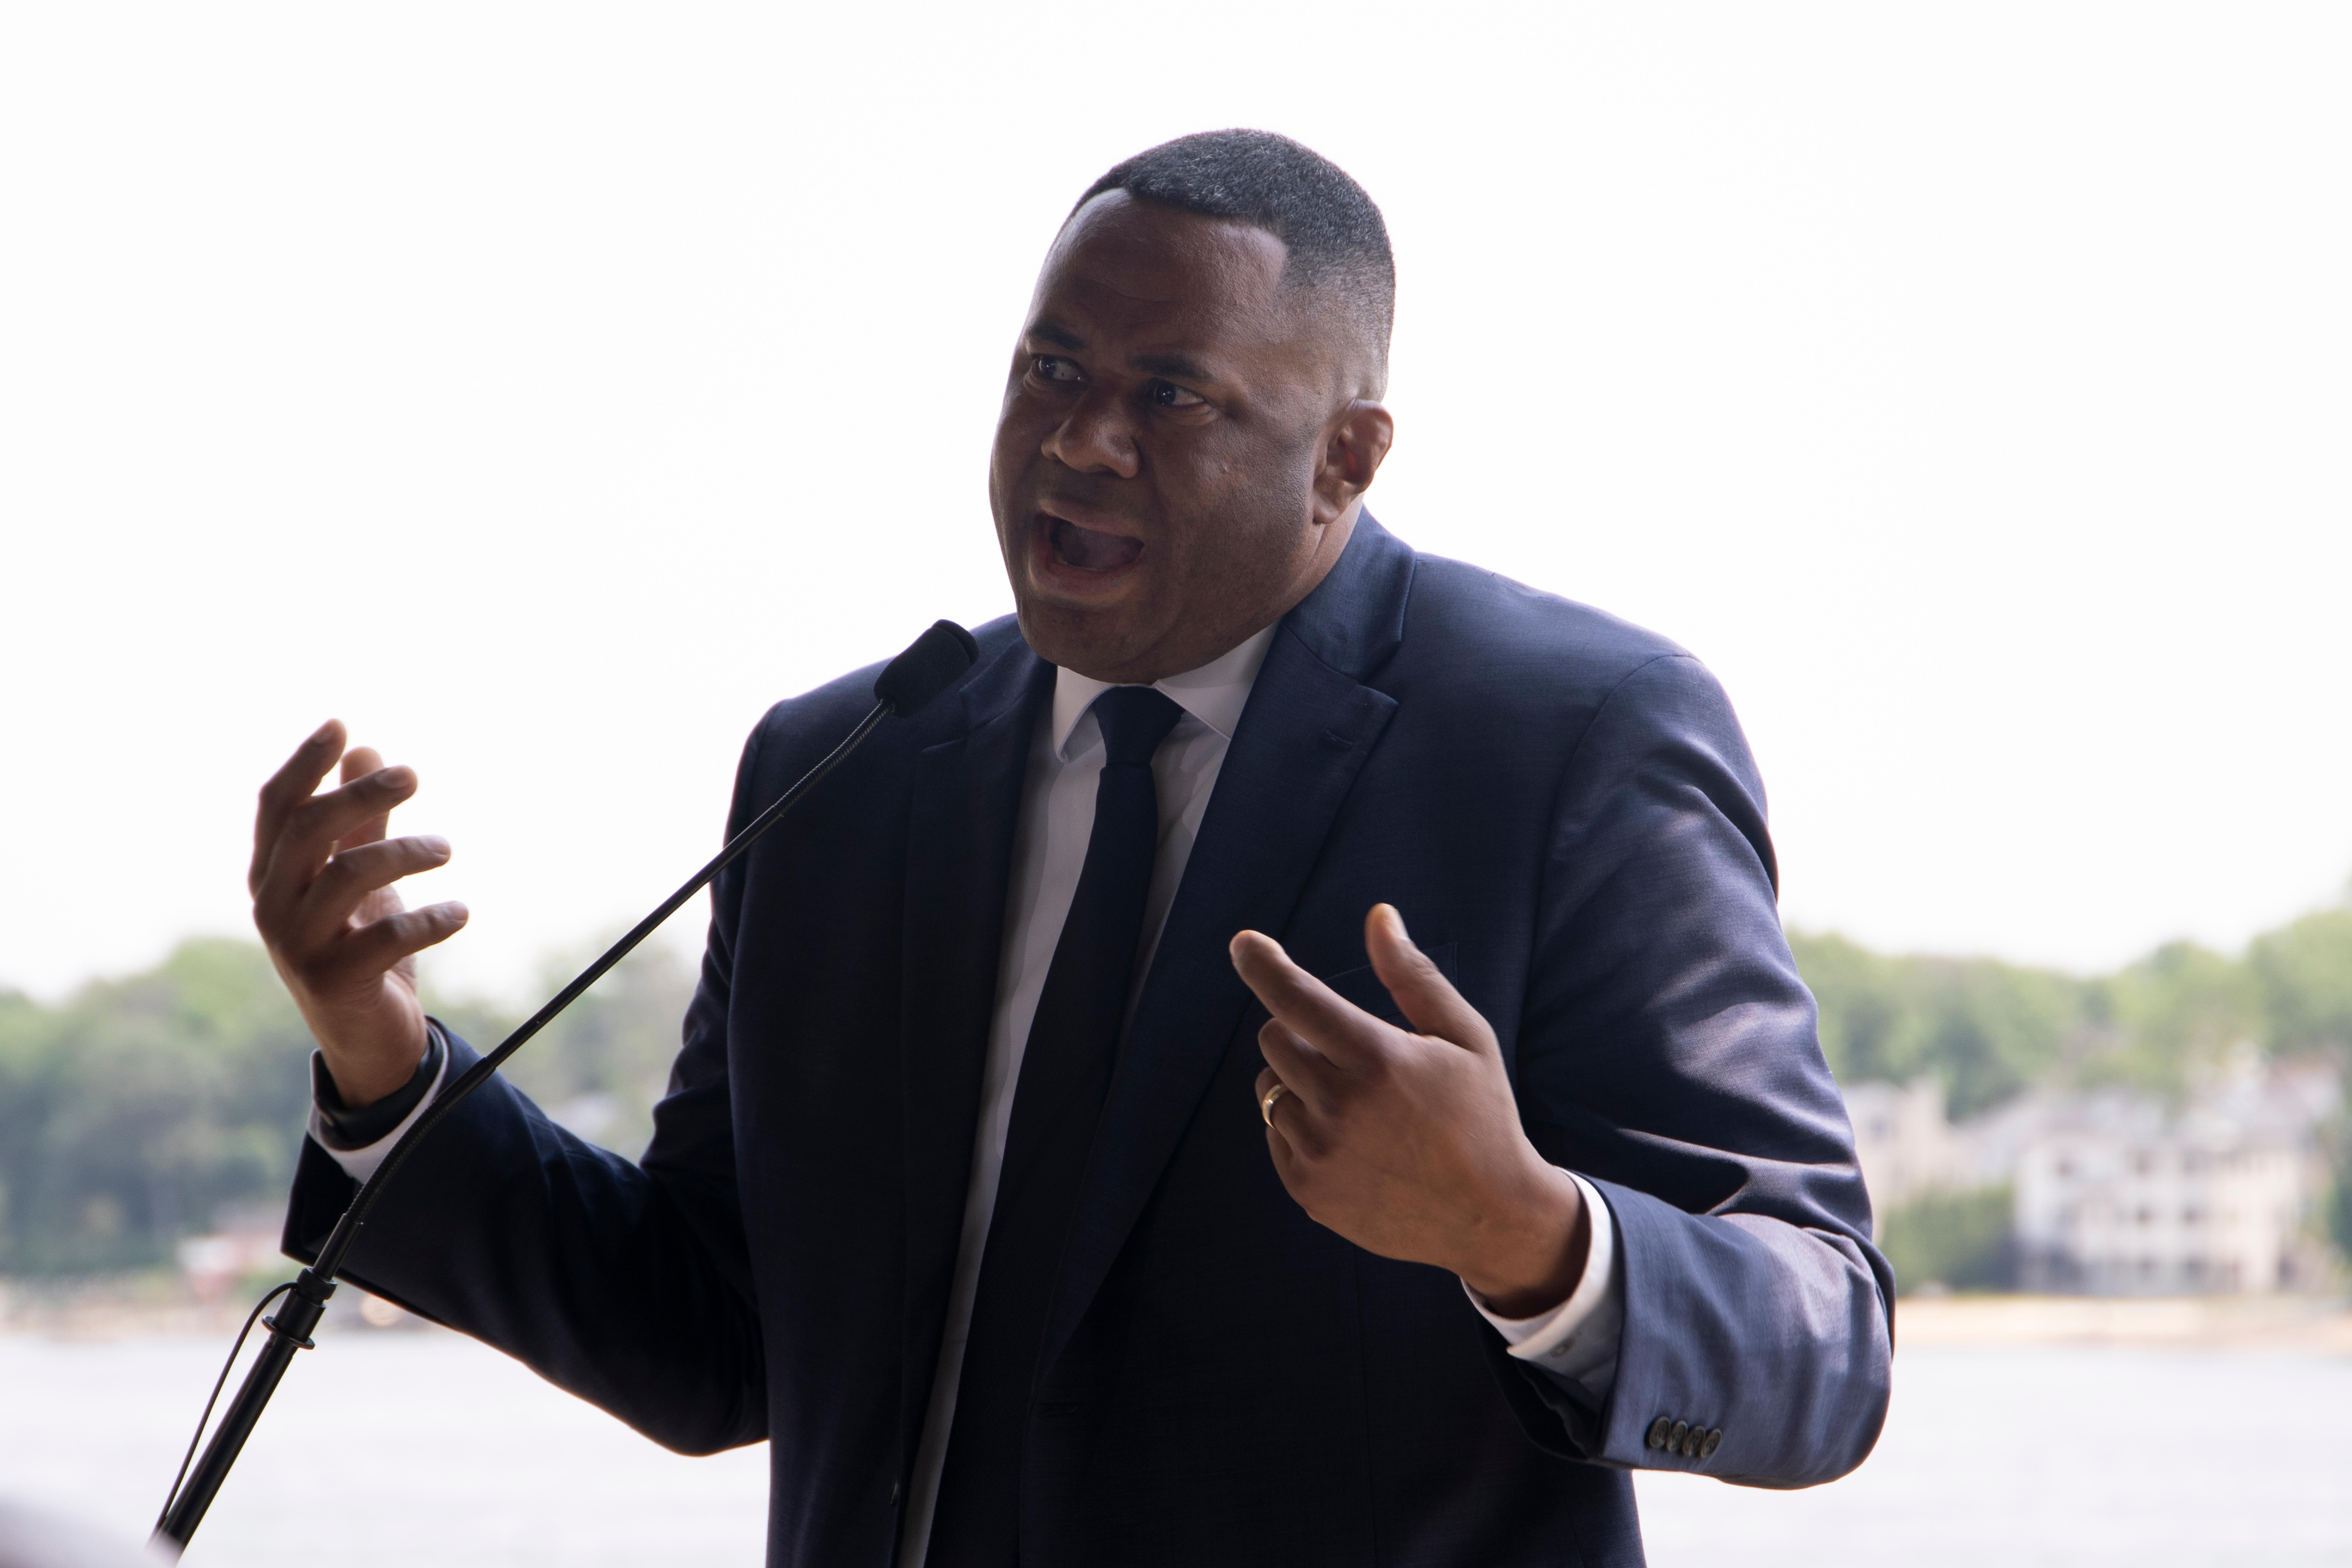 Ryan Haygood, civil rights lawyer speaks at the launching of the Reparations Council organized by the New Jersey Institute of Social Justice at the Perth Amboy Ferry Slip in New Jersey to highlight the ongoing efforts to address the historic injustice faced by the Black community. Monday, June 19, 2023.